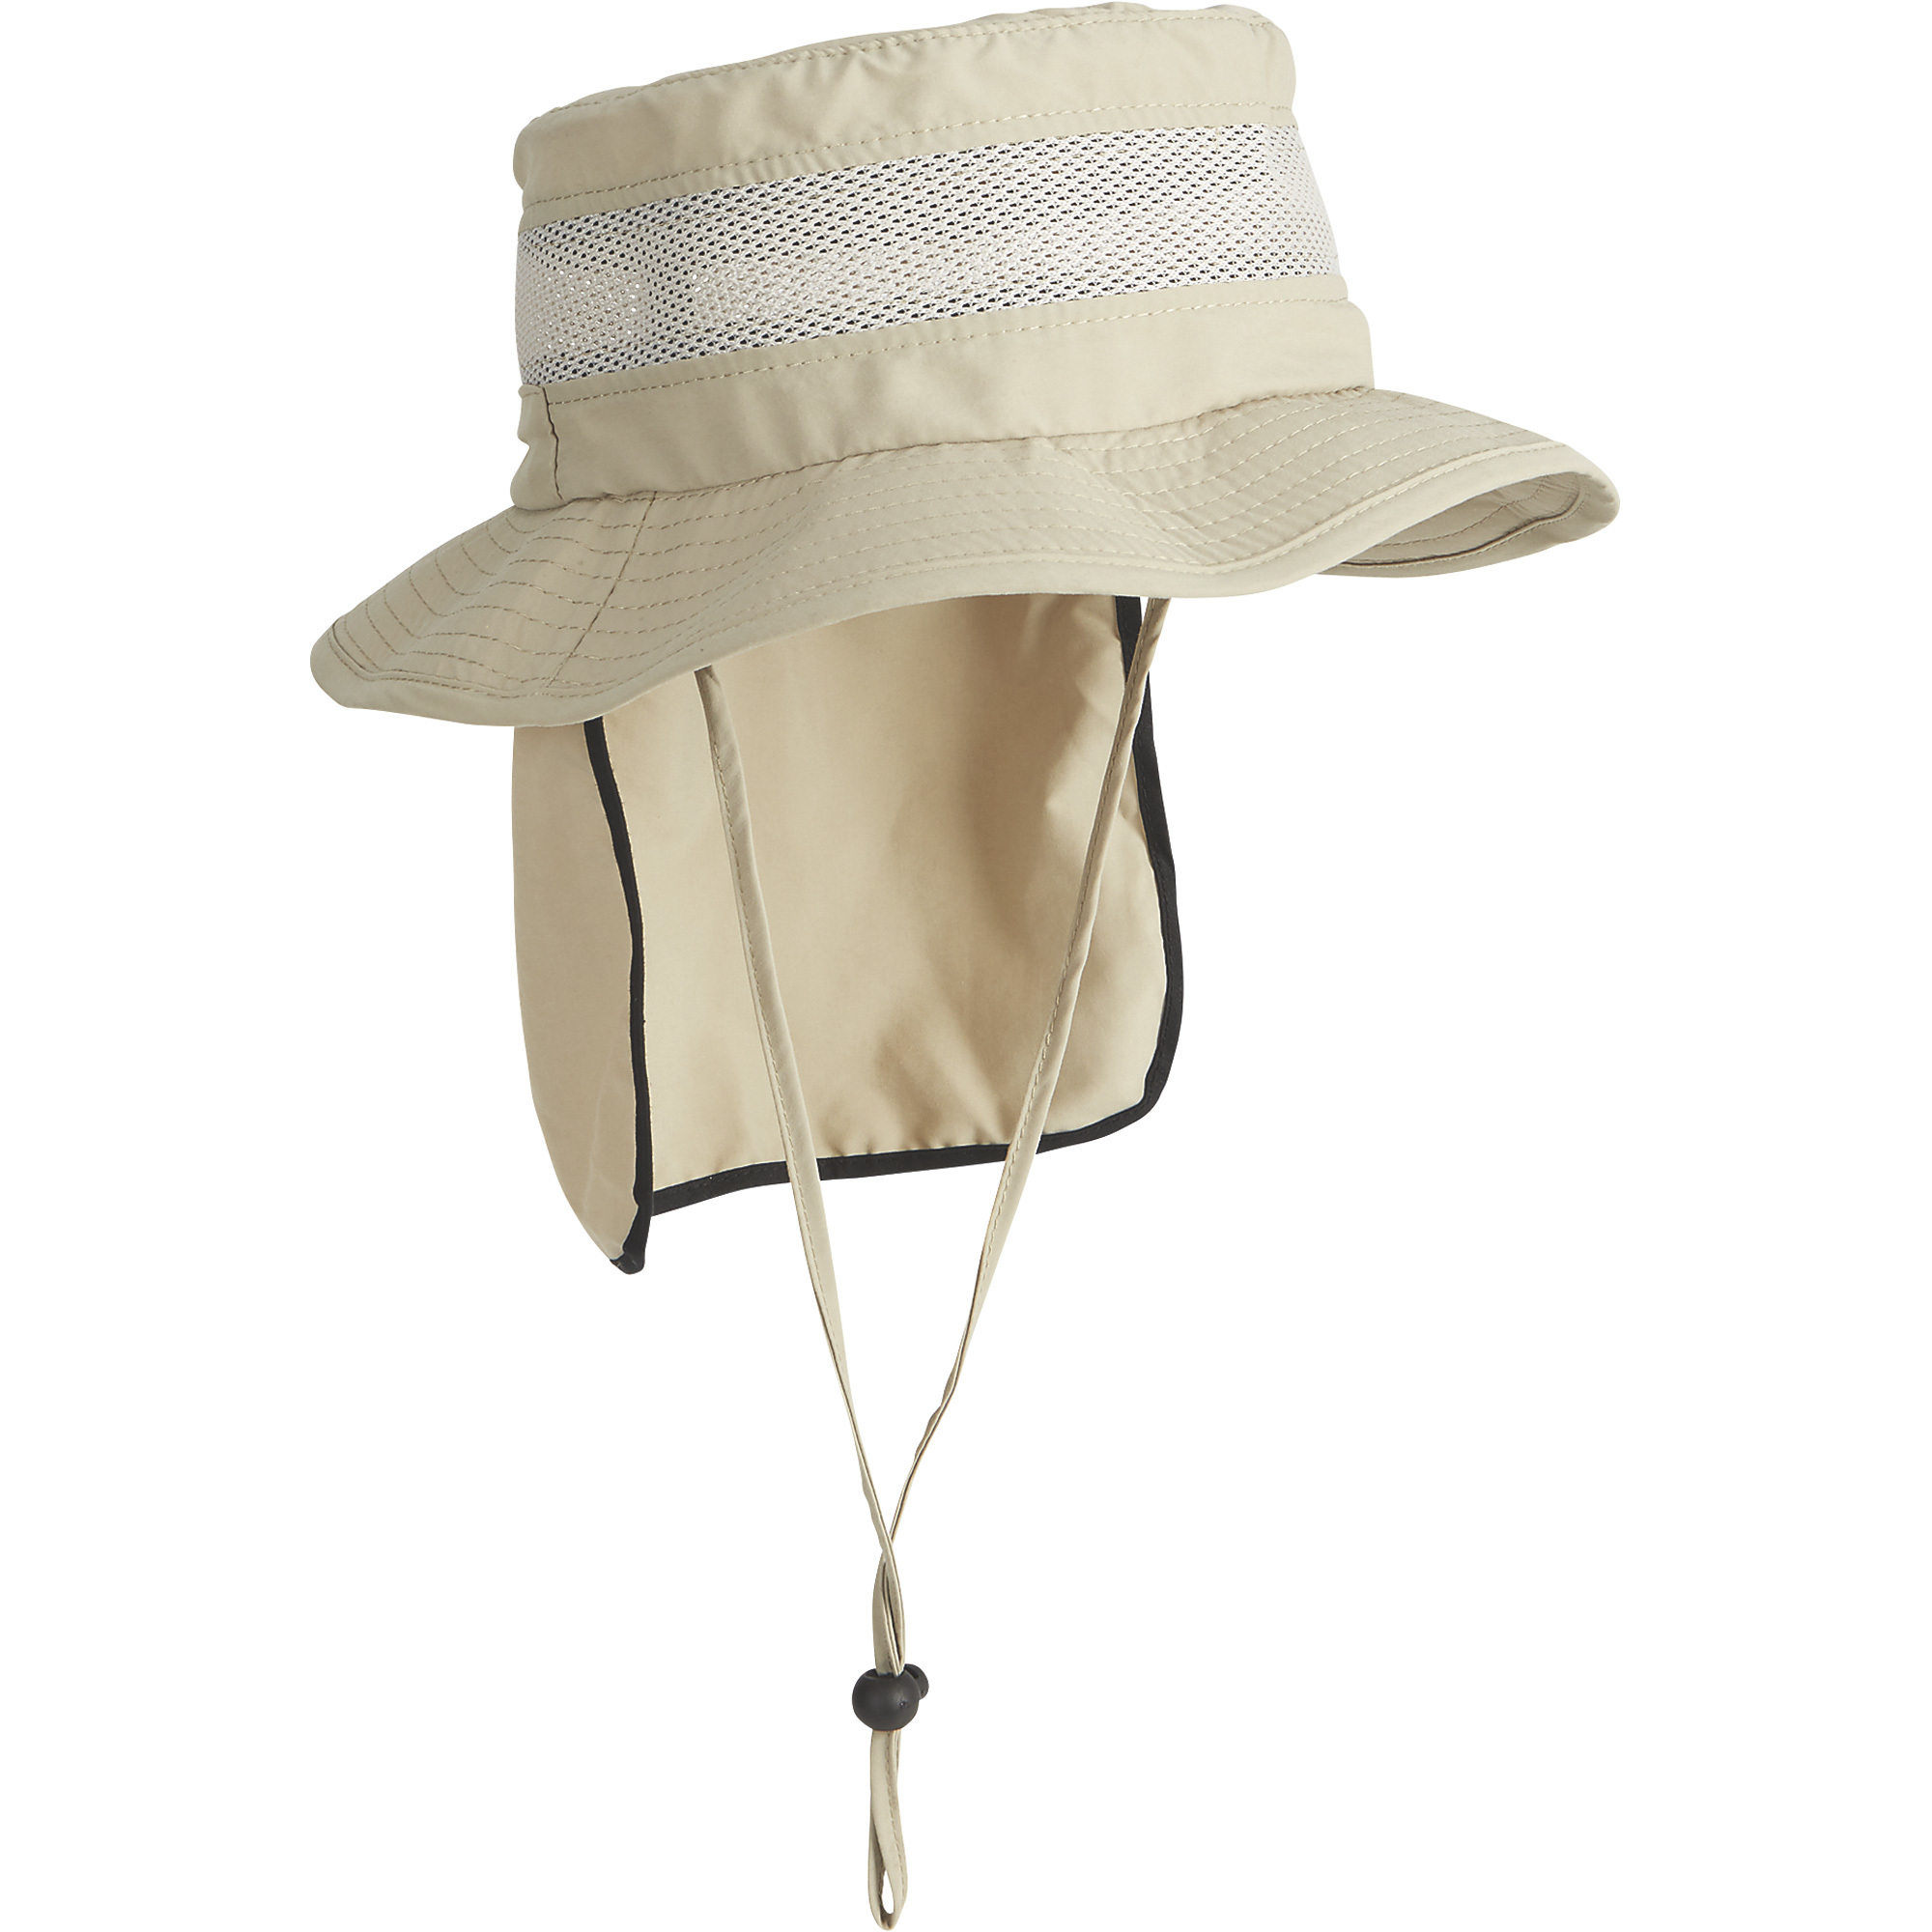 Stetson Boonie Hat with Neck Flap â Khaki, Large, Model DHC199-KAKI3